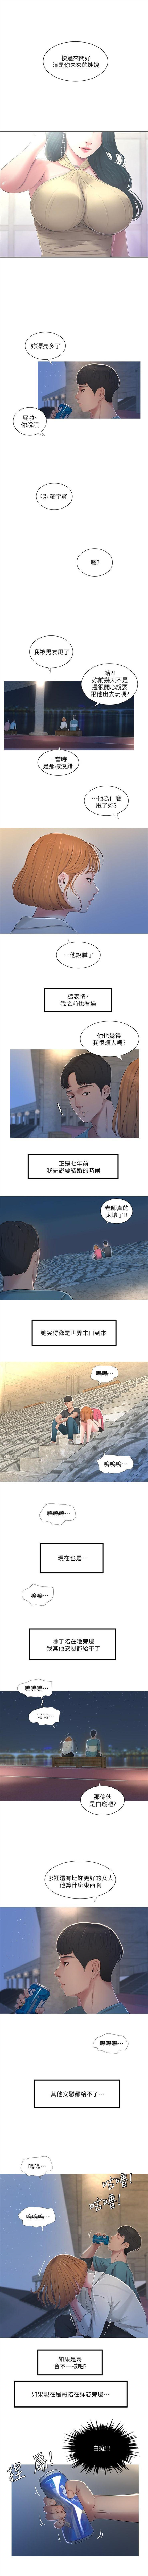 Bribe 親家四姊妹 1-100 官方中文（連載中） Old Vs Young - Page 6